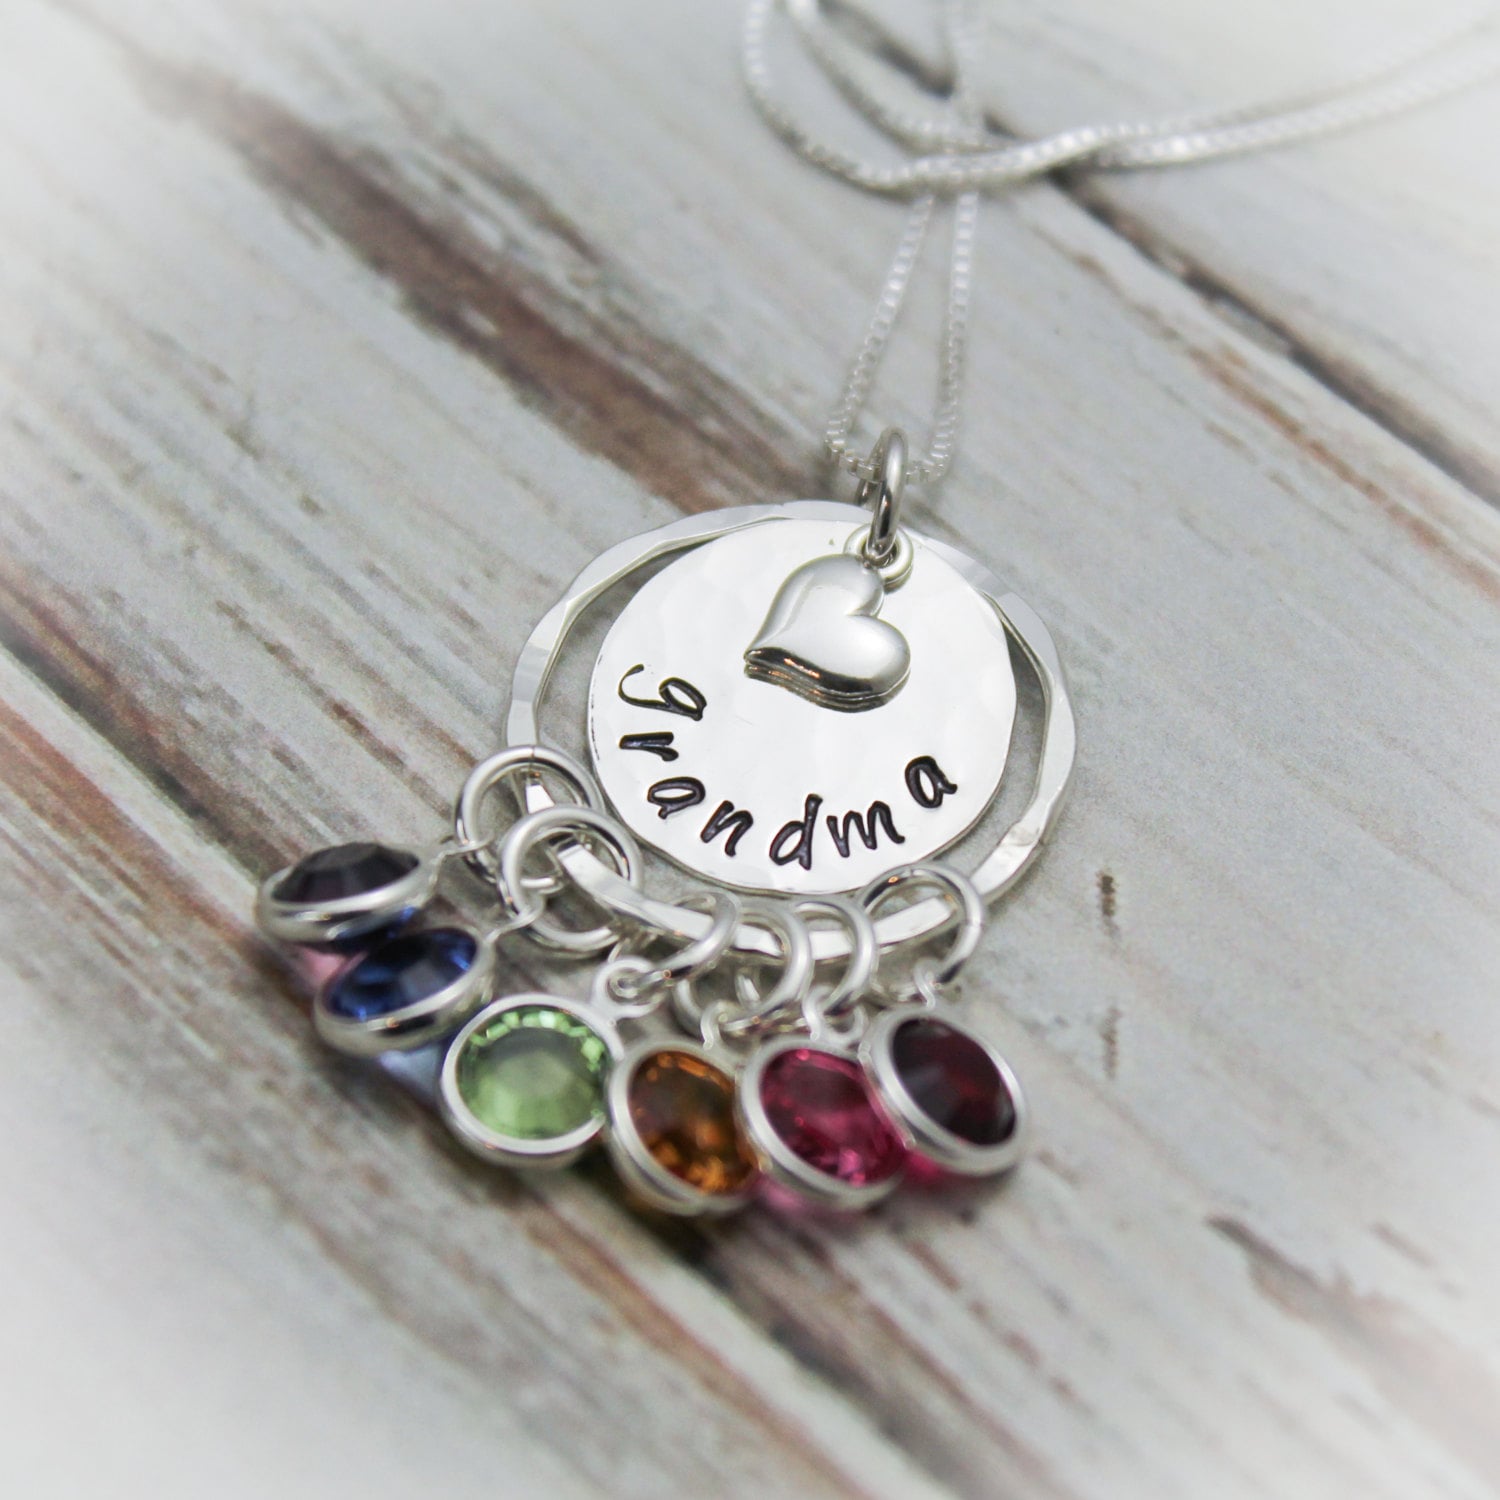 Grandmothers Charm Necklace with Floating Hearts for Four Grandchildren